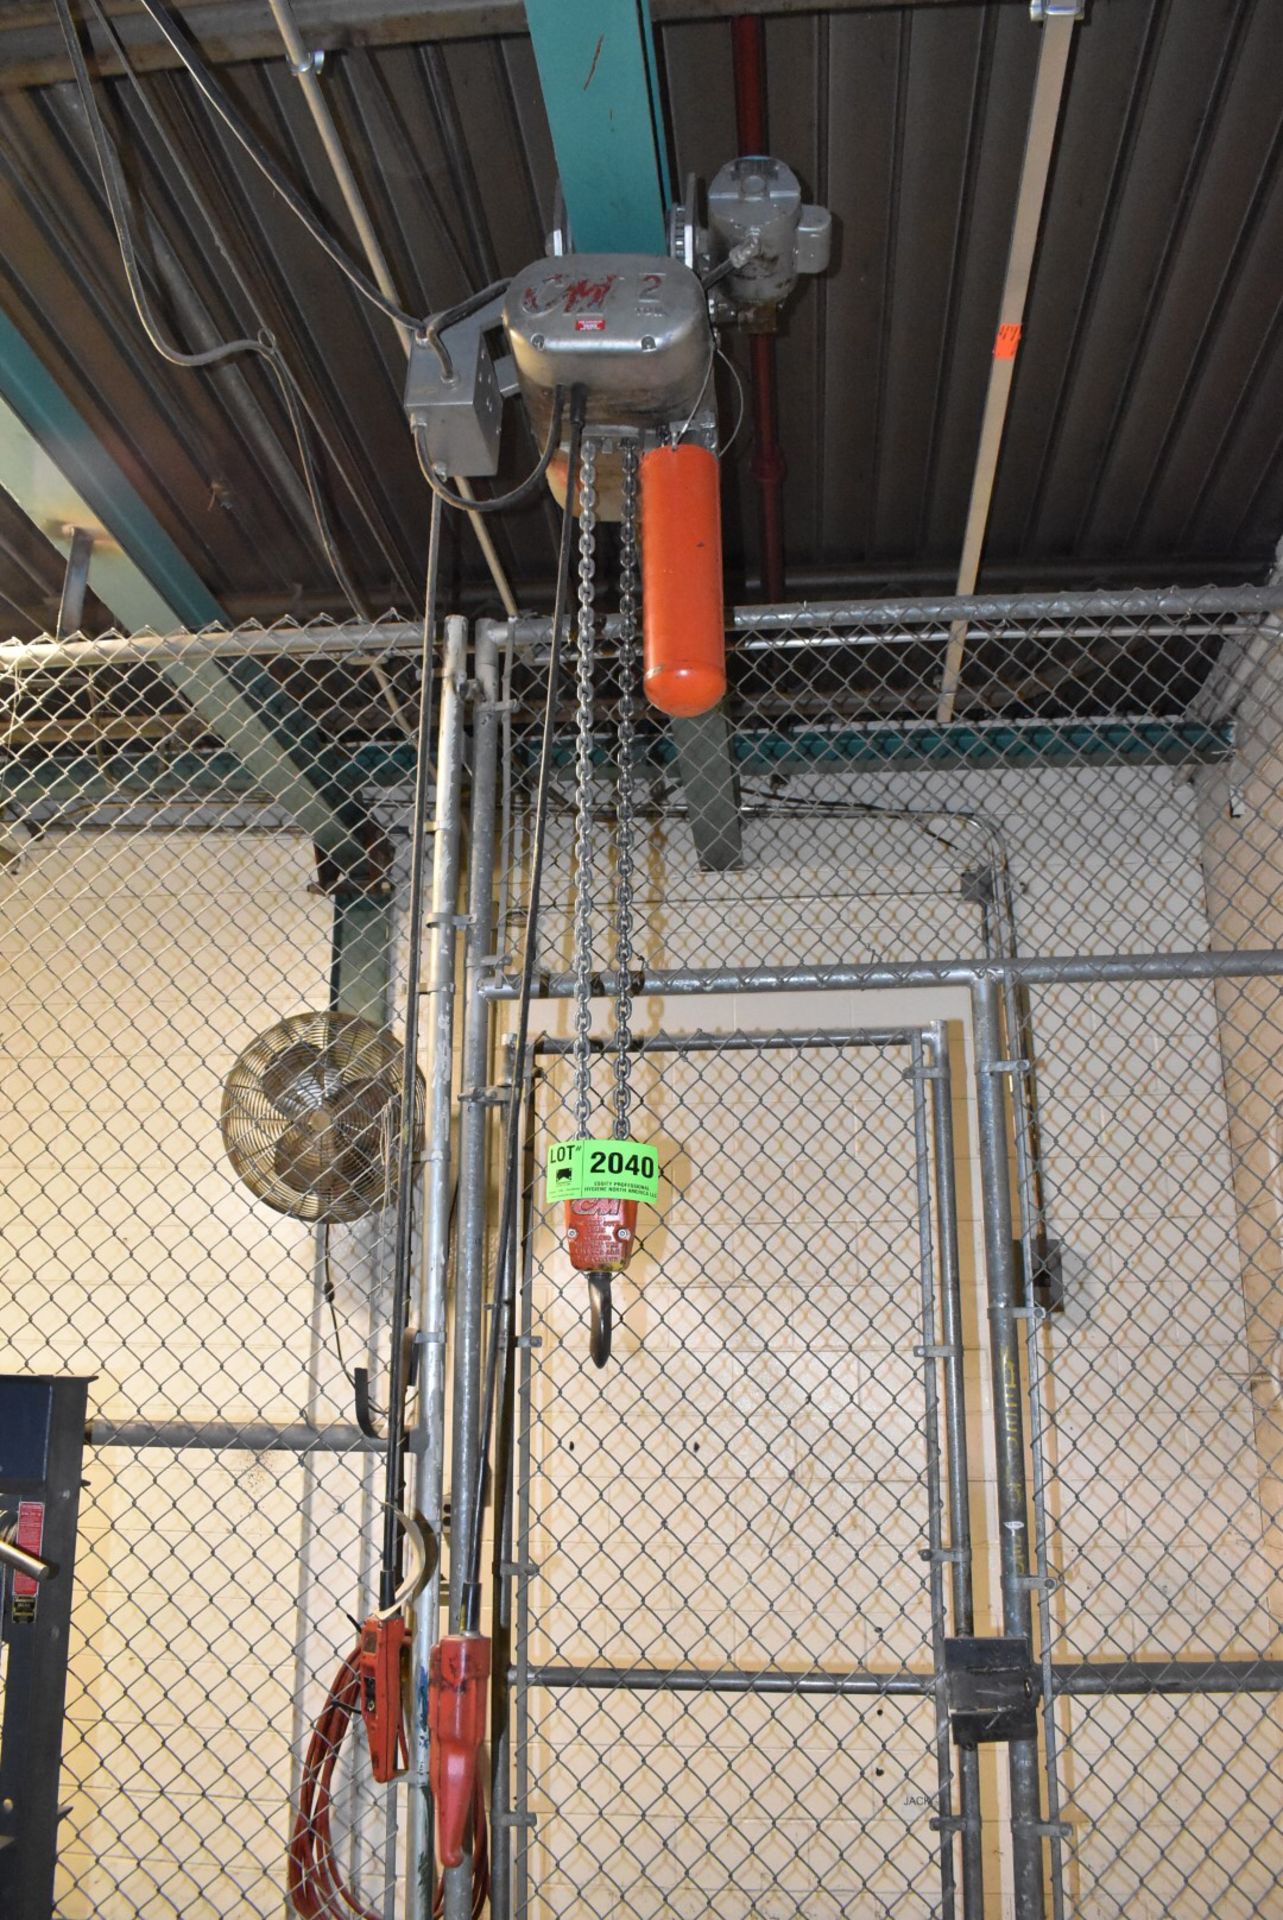 CM 2 TON ELECTRIC HOIST WITH PENDENT CONTROL S/N N/A (CI) [RIGGING FEES FOR LOT #2040 - $100 USD